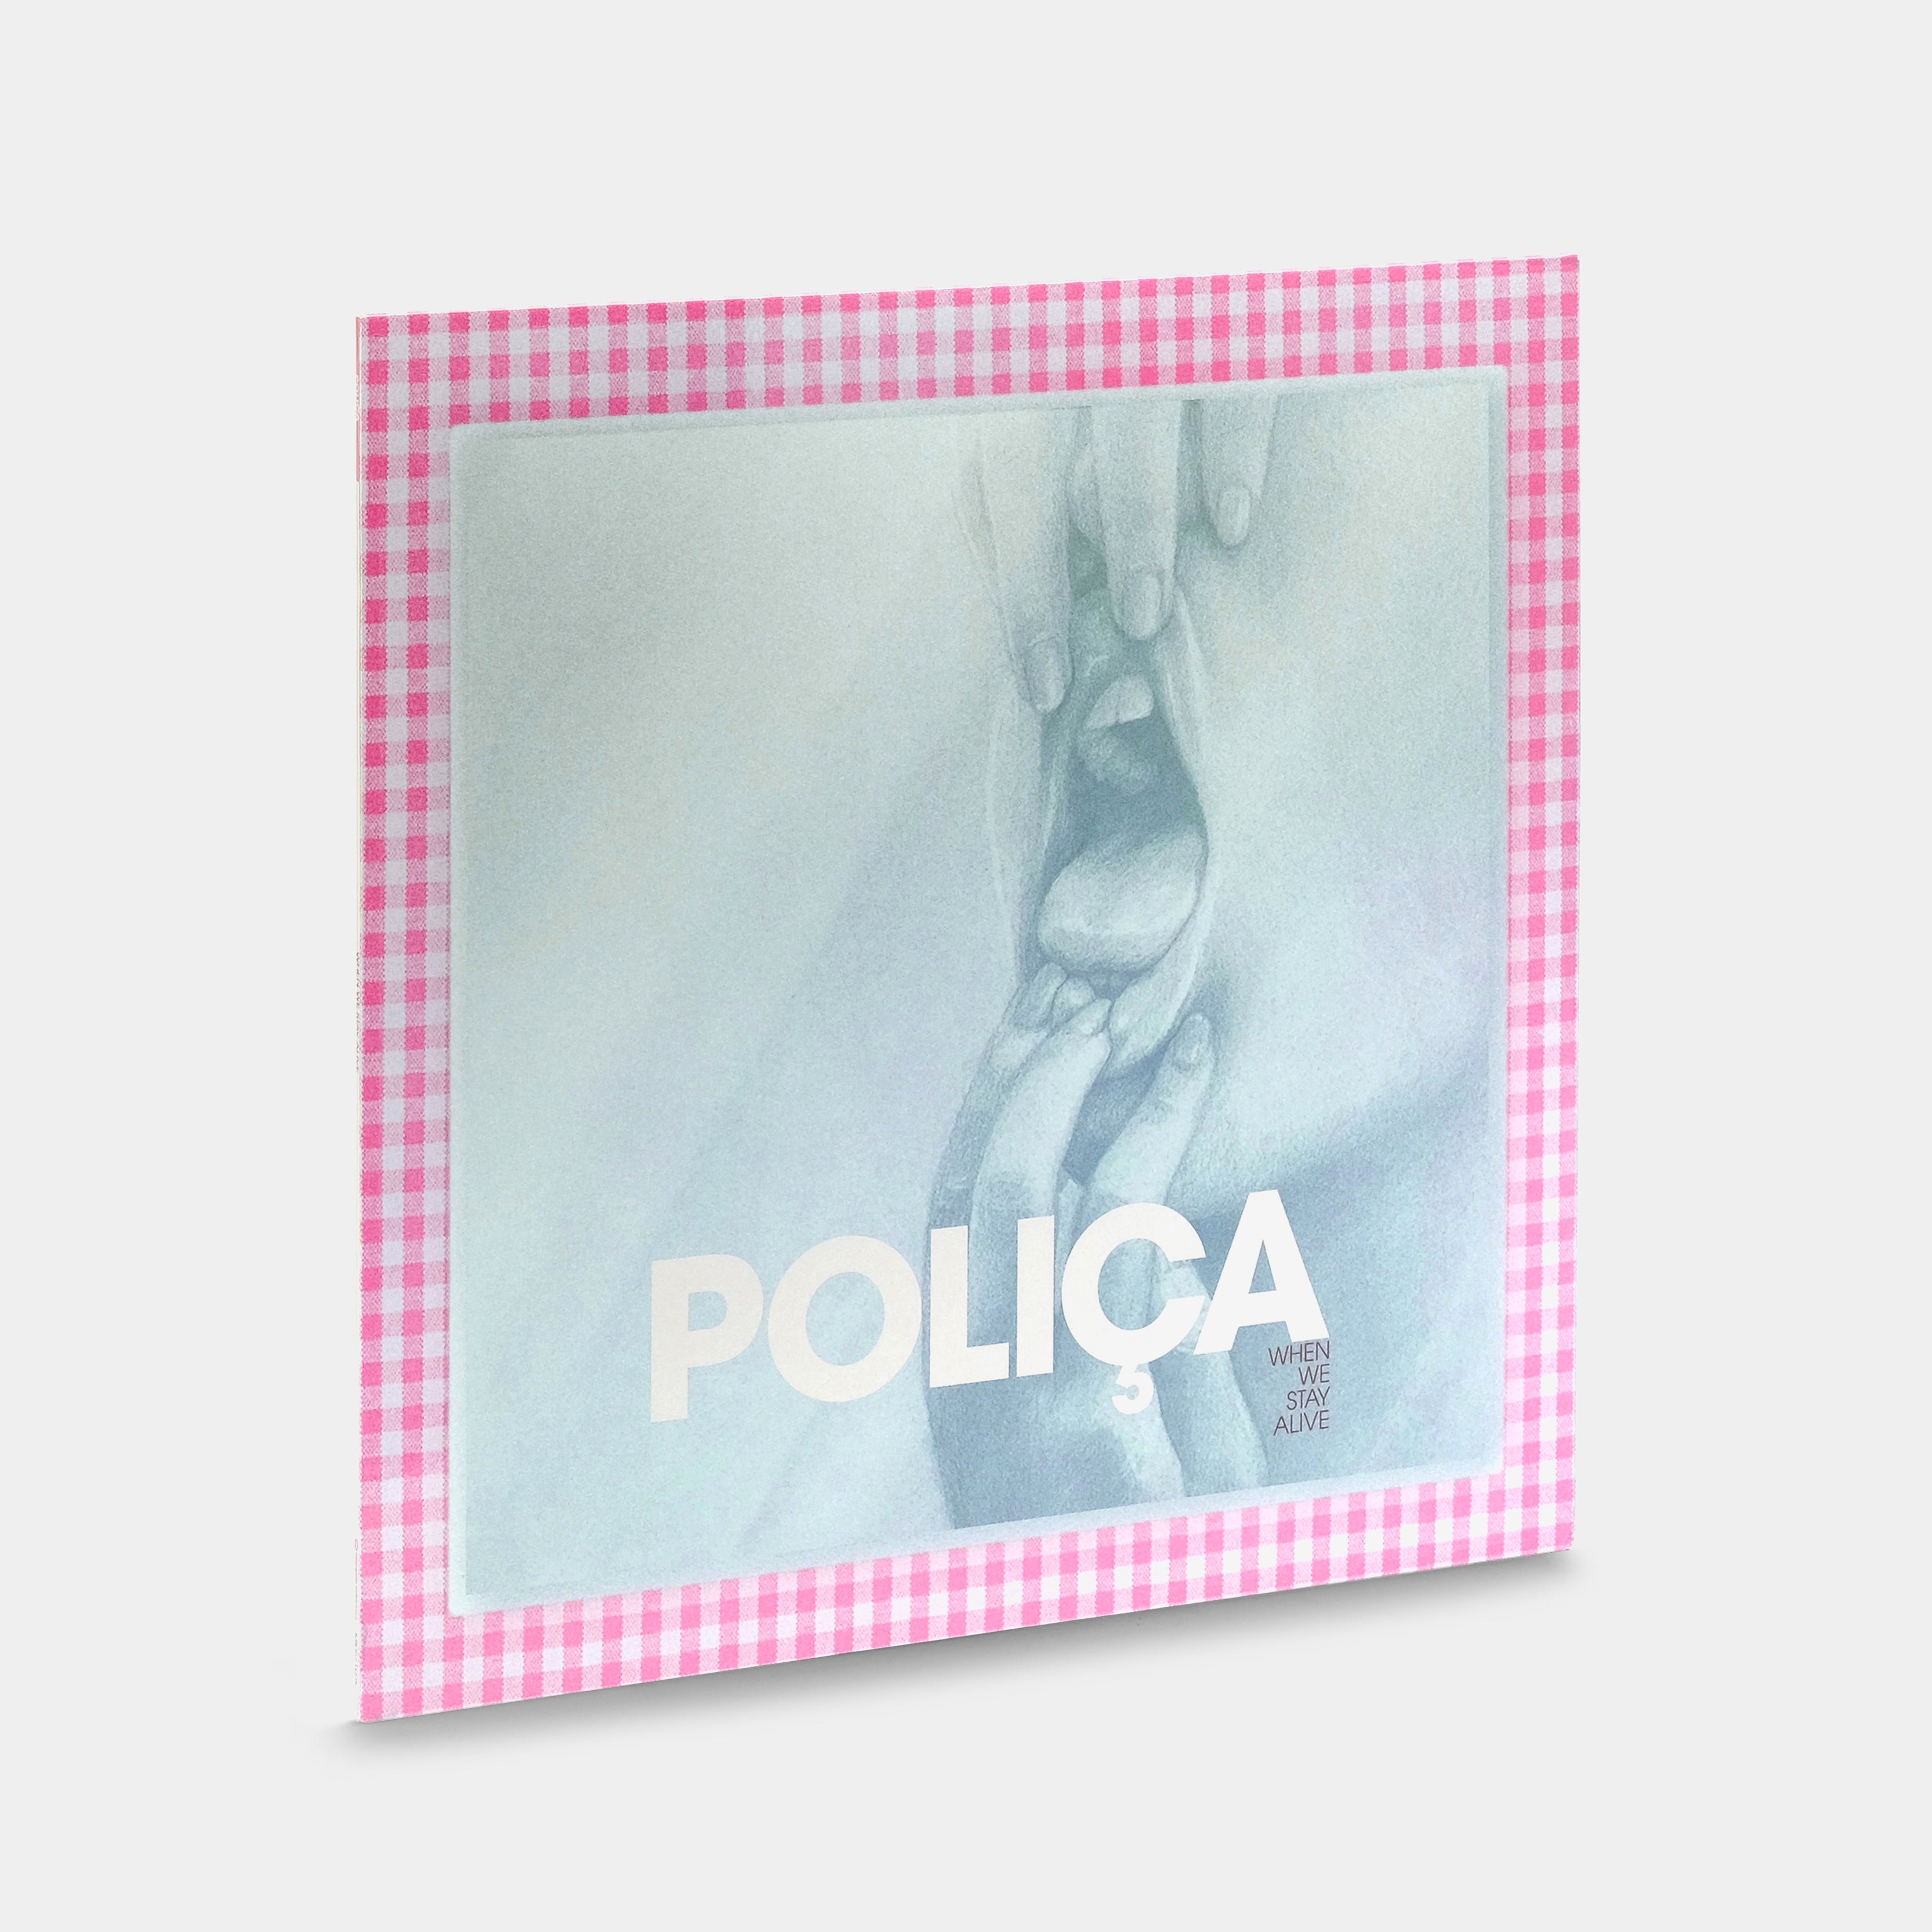 Poliça - When We Stay Alive LP Crystal Clear Vinyl Record